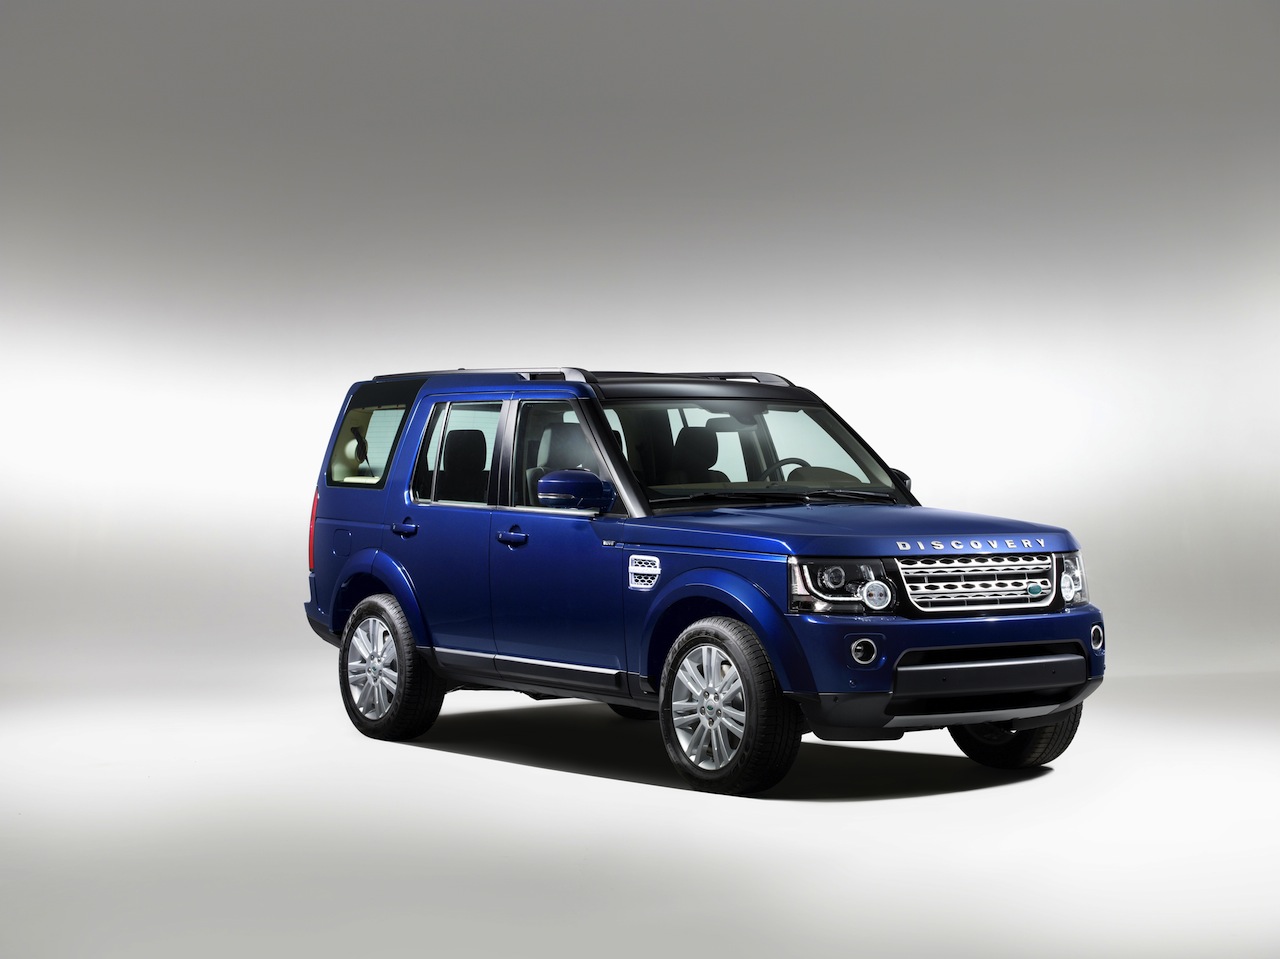 2014 Land Rover Discovery 4 - Showing 2014-Land-Rover-Discovery-4-1.jpg